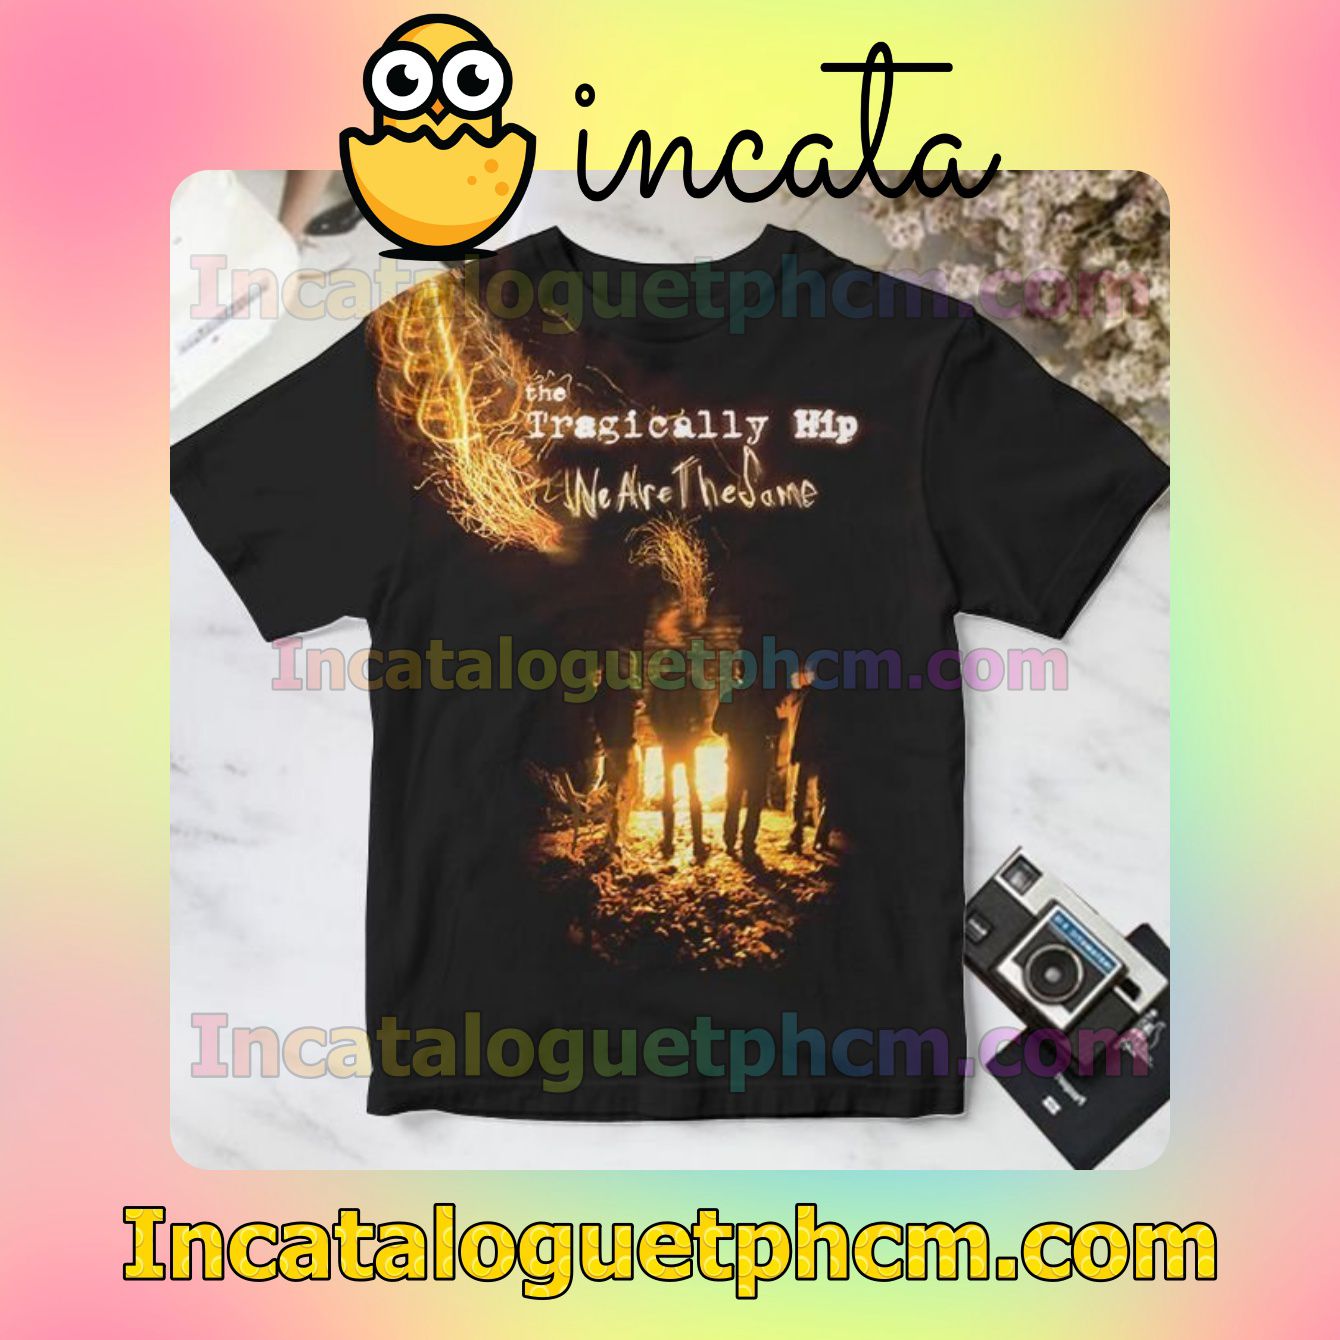 The Tragically Hip We Are The Same Album Cover For Fan Personalized T-Shirt